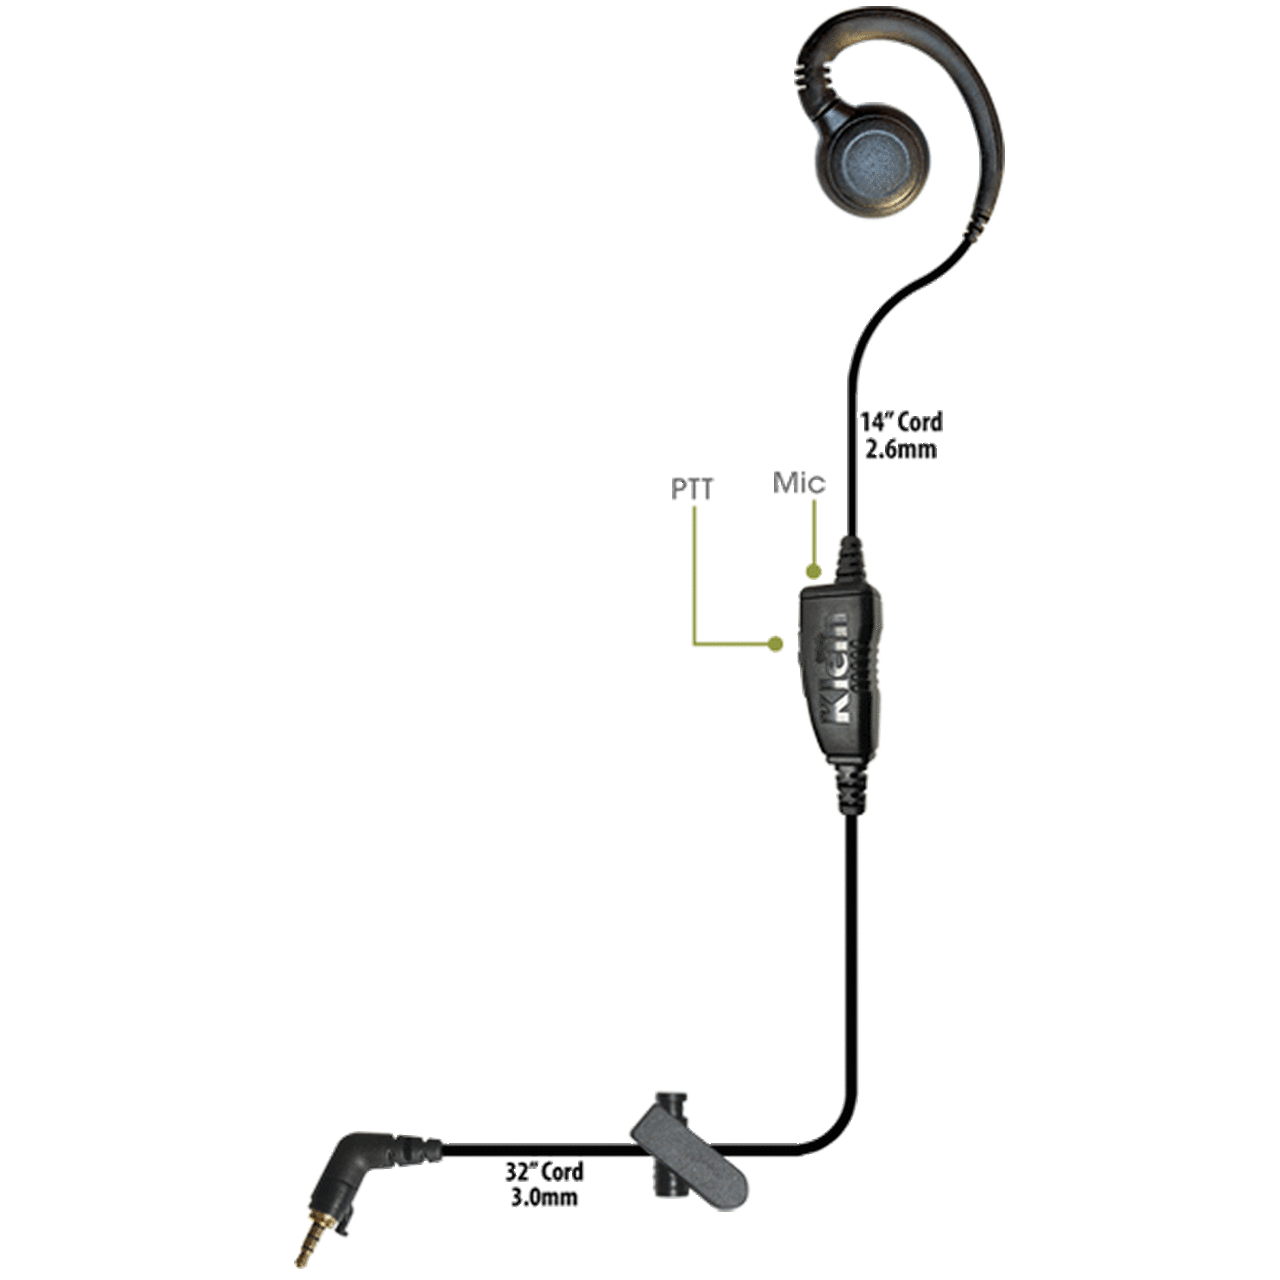 CURL Single-Wire PTT Earpiece Kit with Camlock Connector for Kyocera by Klein Electronics CURL-KYBR-CL